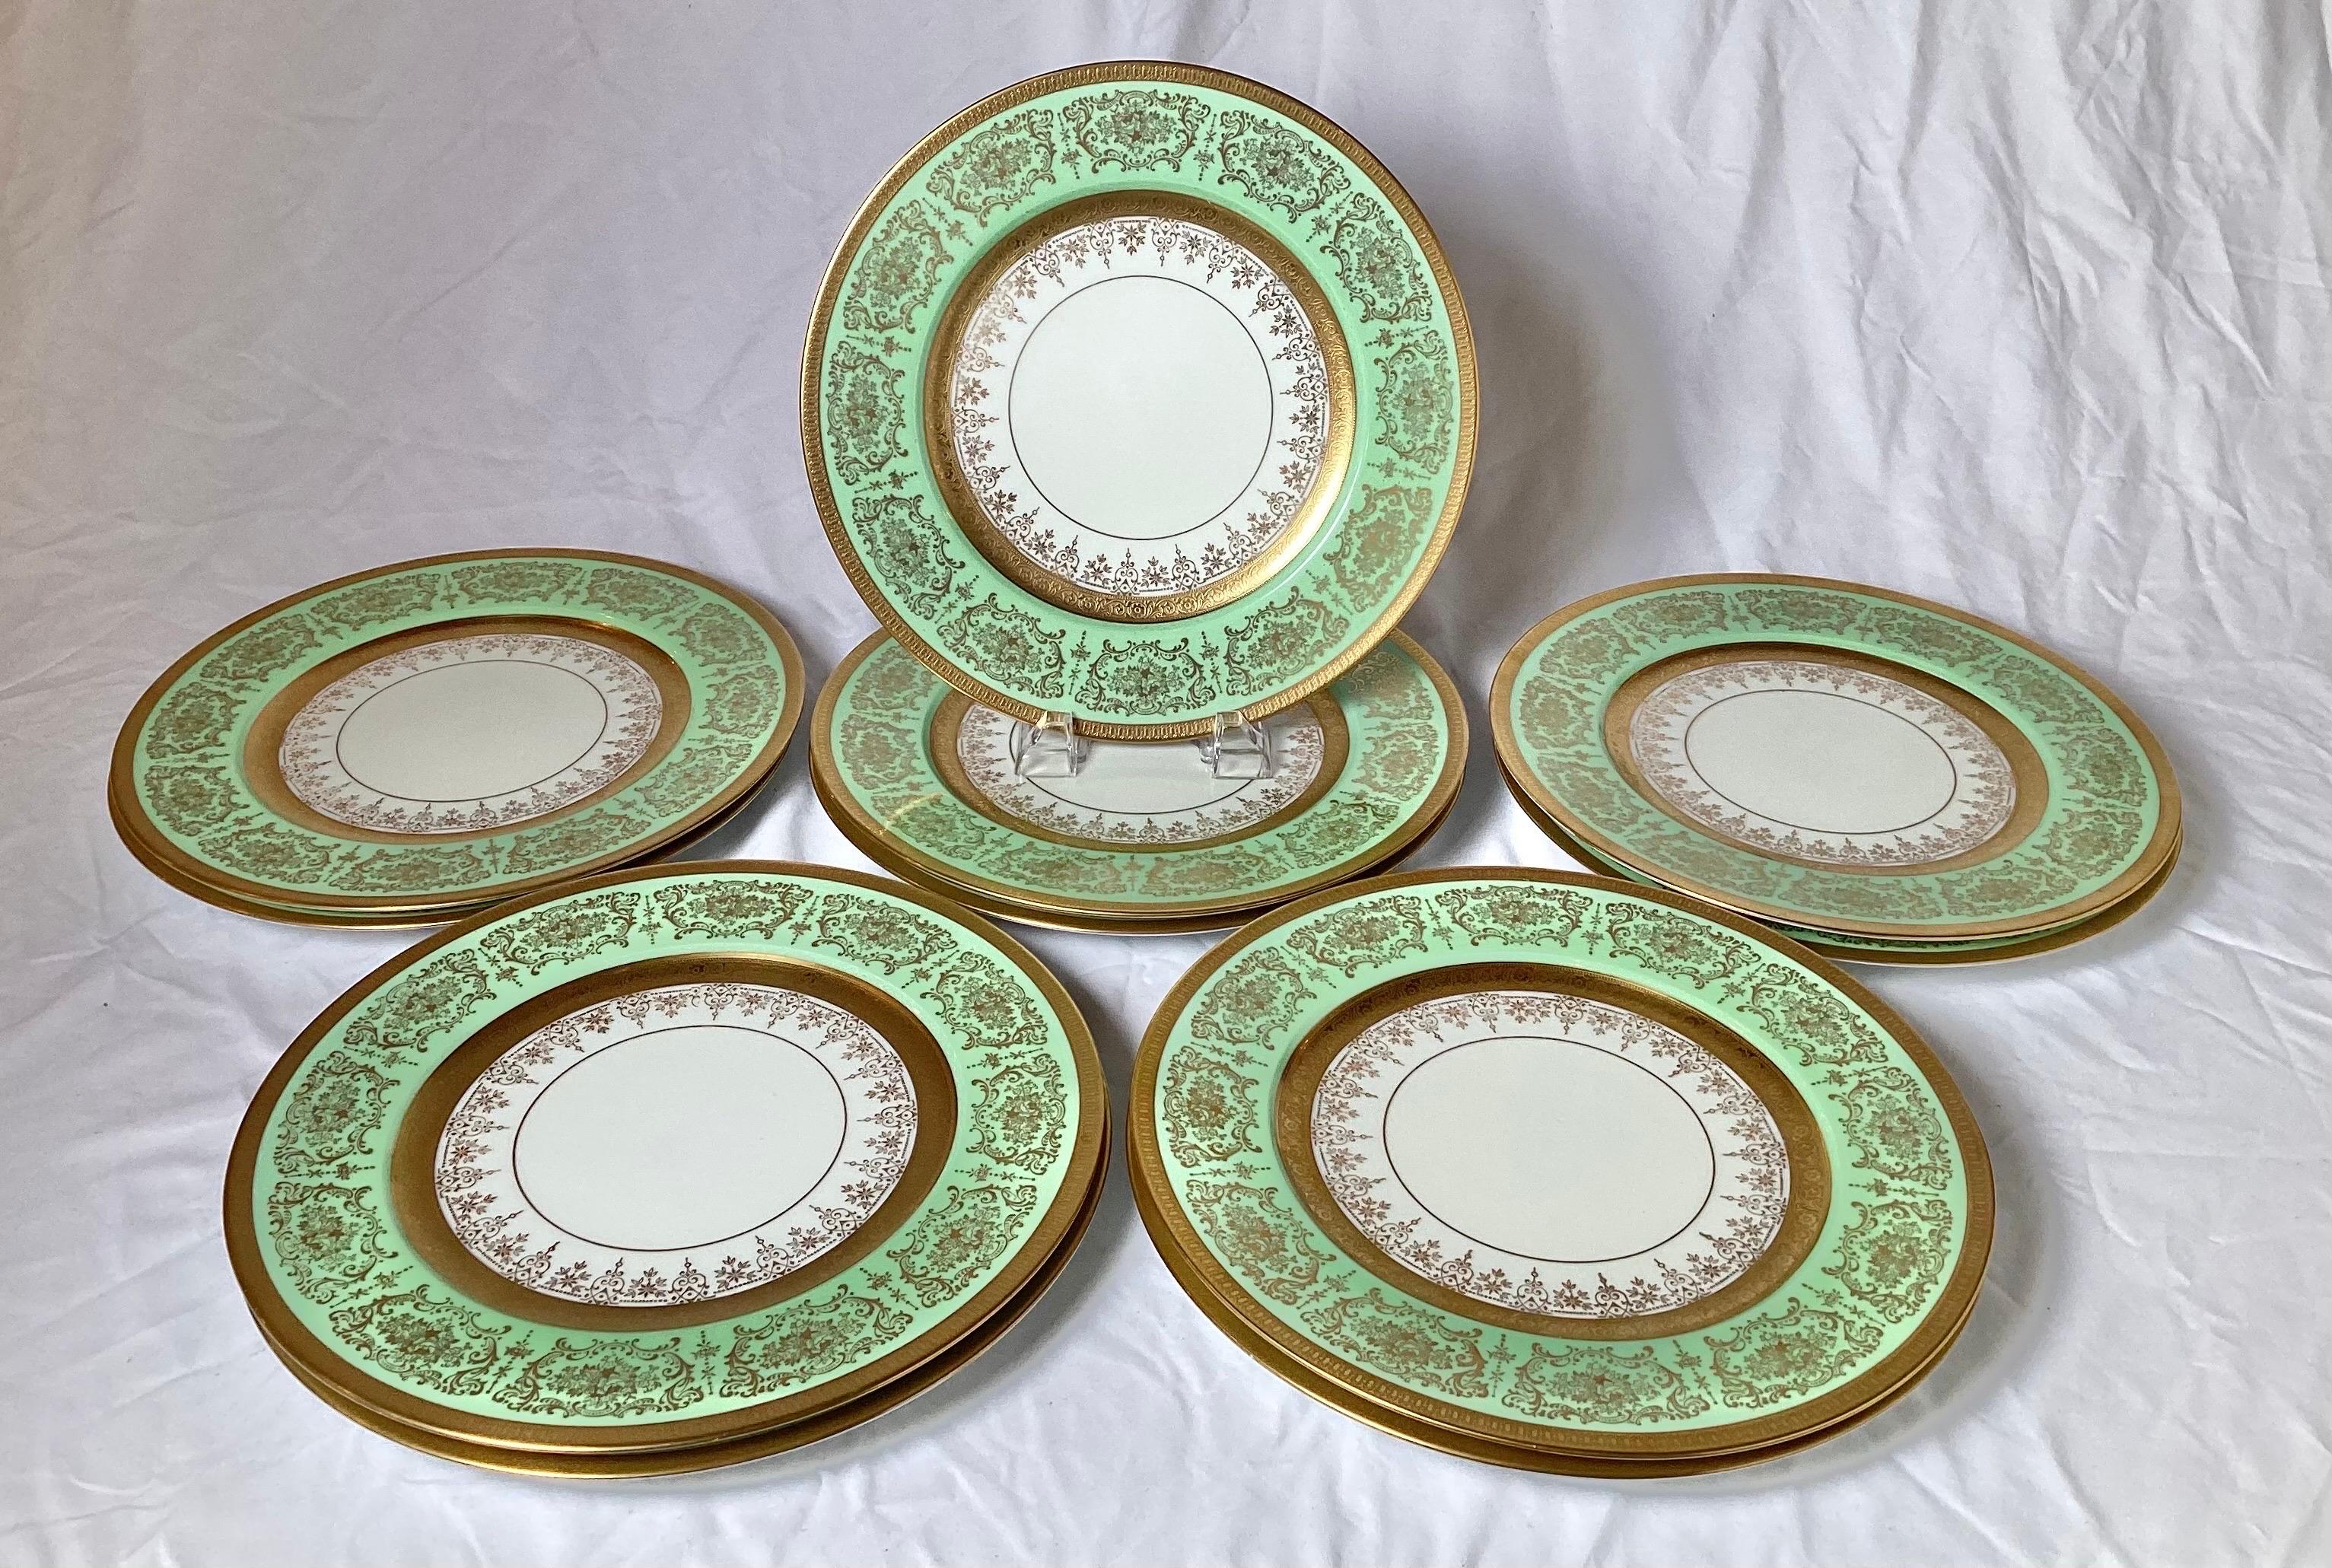 An elegant set of 11 Edgerton lacy gilt service plates with an apple green border. A thick gold band border with an inner gold band with a lacy overlay with an apple green background. 11 inches in Diameter, these will make a beautiful table setting